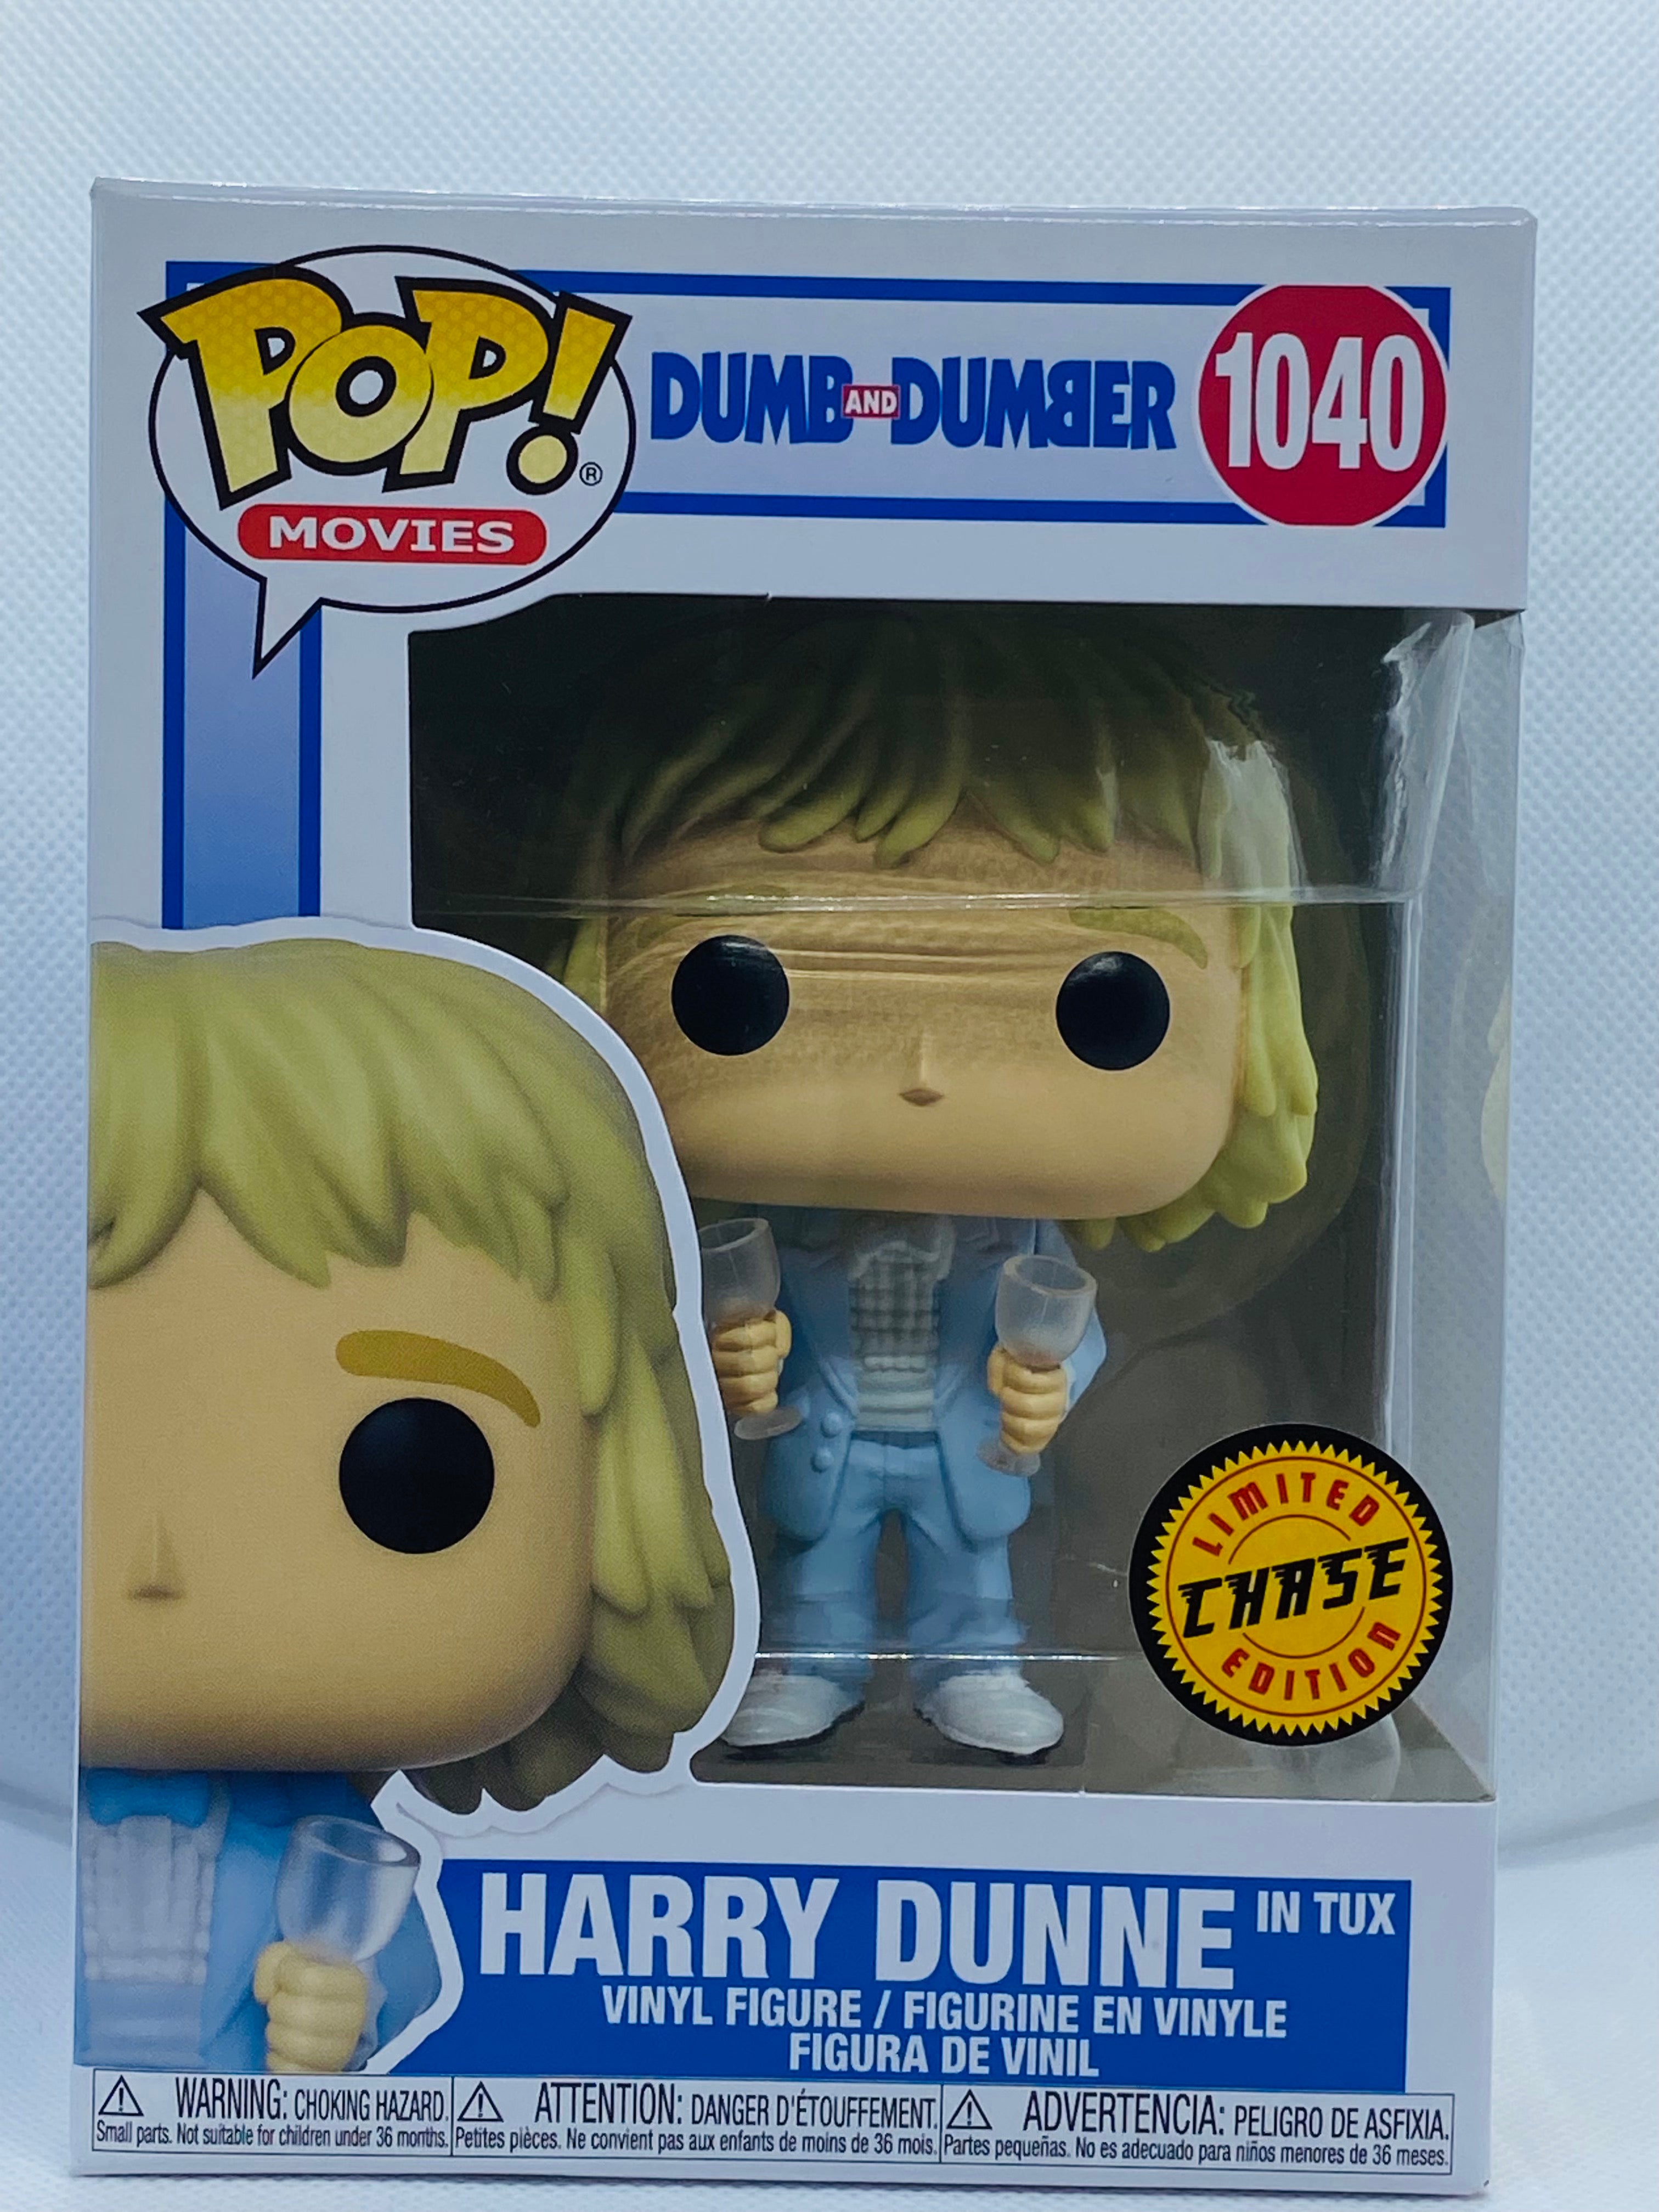 Harry Dunne in Tux 1040 Dumb and Dumber Limited Edition Chase Funko Pop